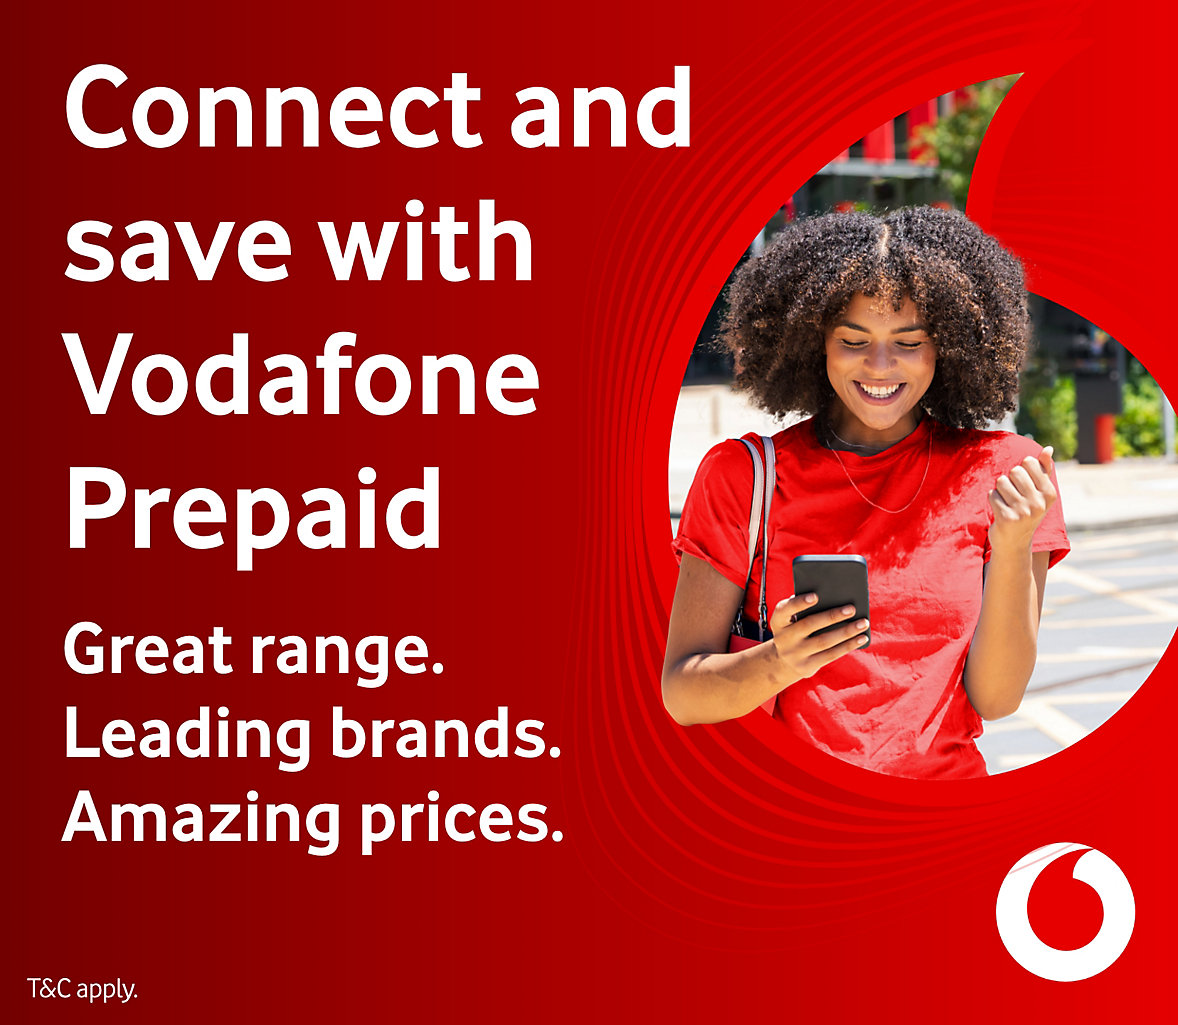 Connect and save with Vodafone Prepaid